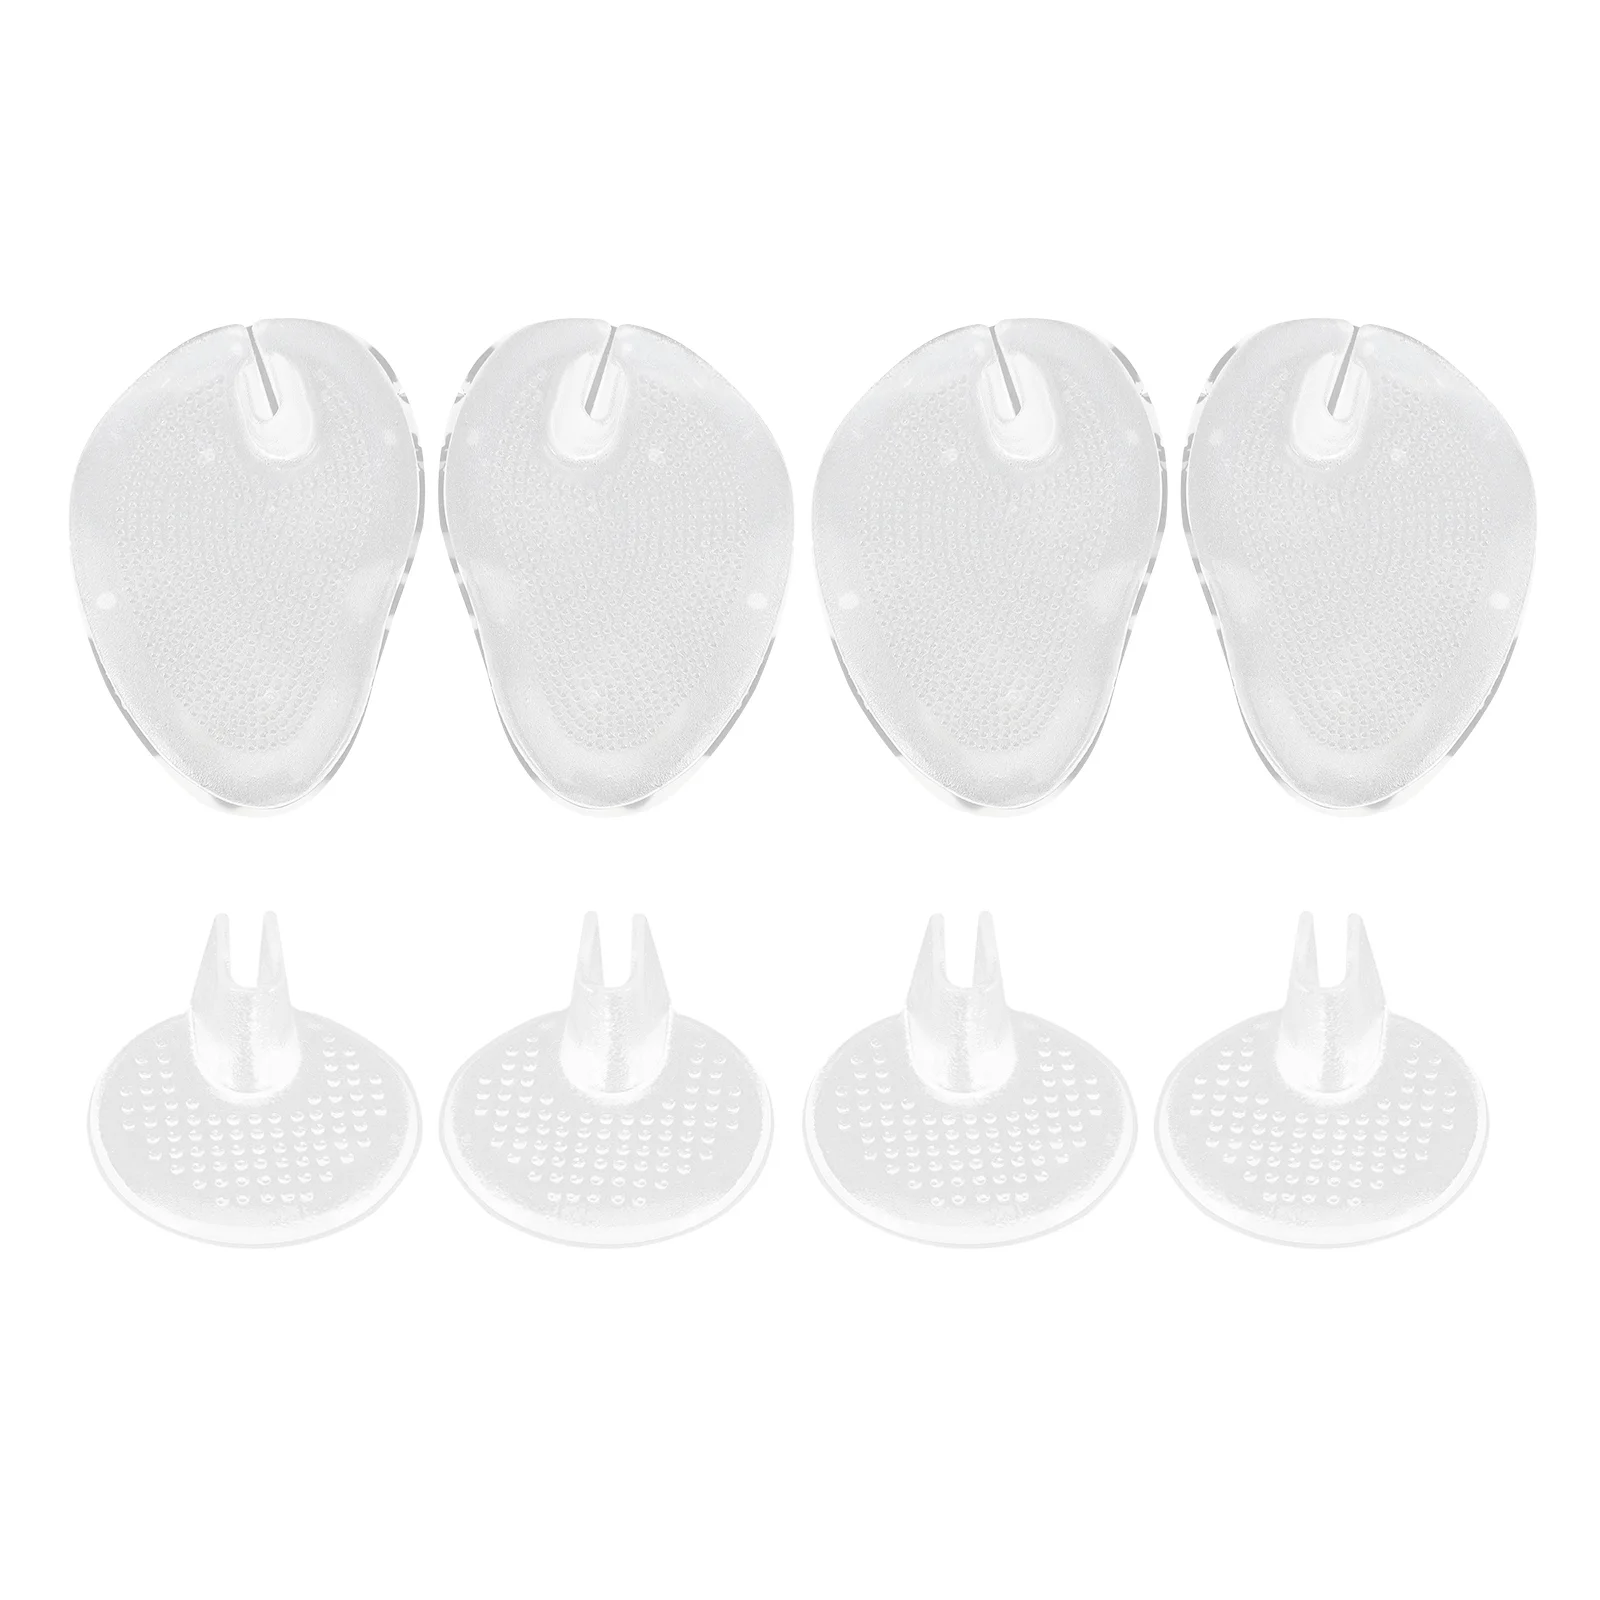 4 Pairs Thong Sandal Metatarsal Pads Silicone Toe Cushionsss Clear Toe Guards flip flop pads metatarsal pads ball foot cushions no slip silicone shoe inserts pad gel metatarsal pads thong sandals